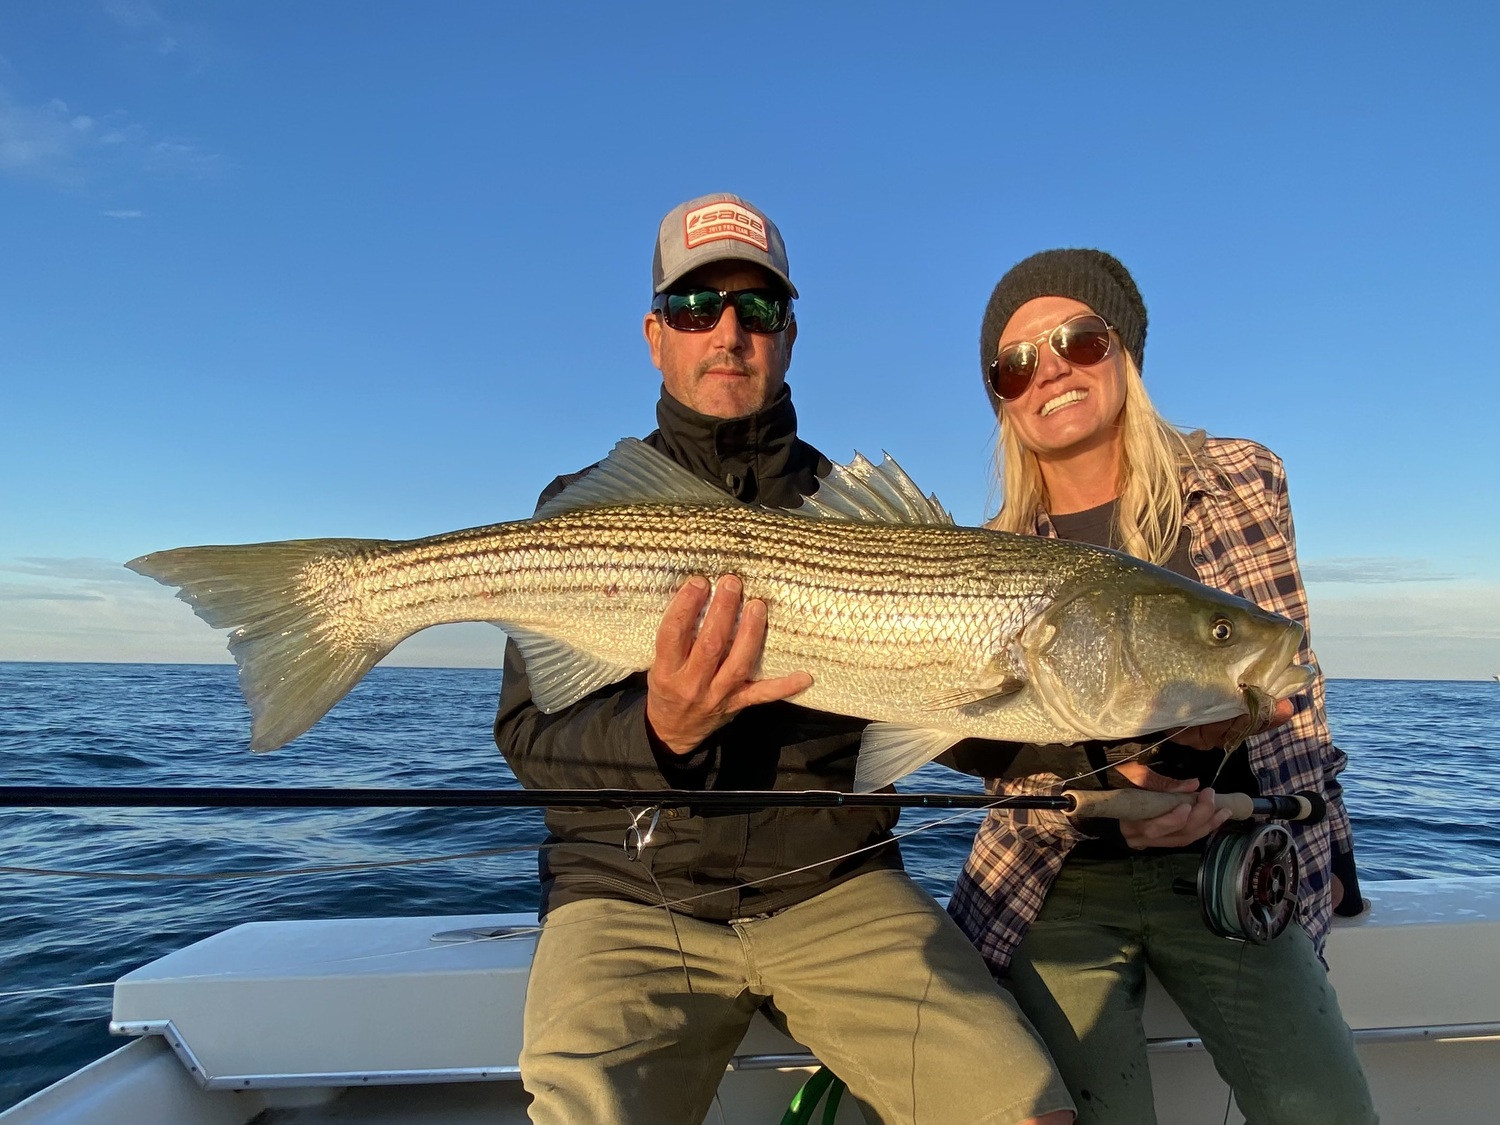 Capt. Tim O'Rourke says that a majority of his customers, like Lea Standahl, are fishing for the thrill of catching striped bass on fly rods or 